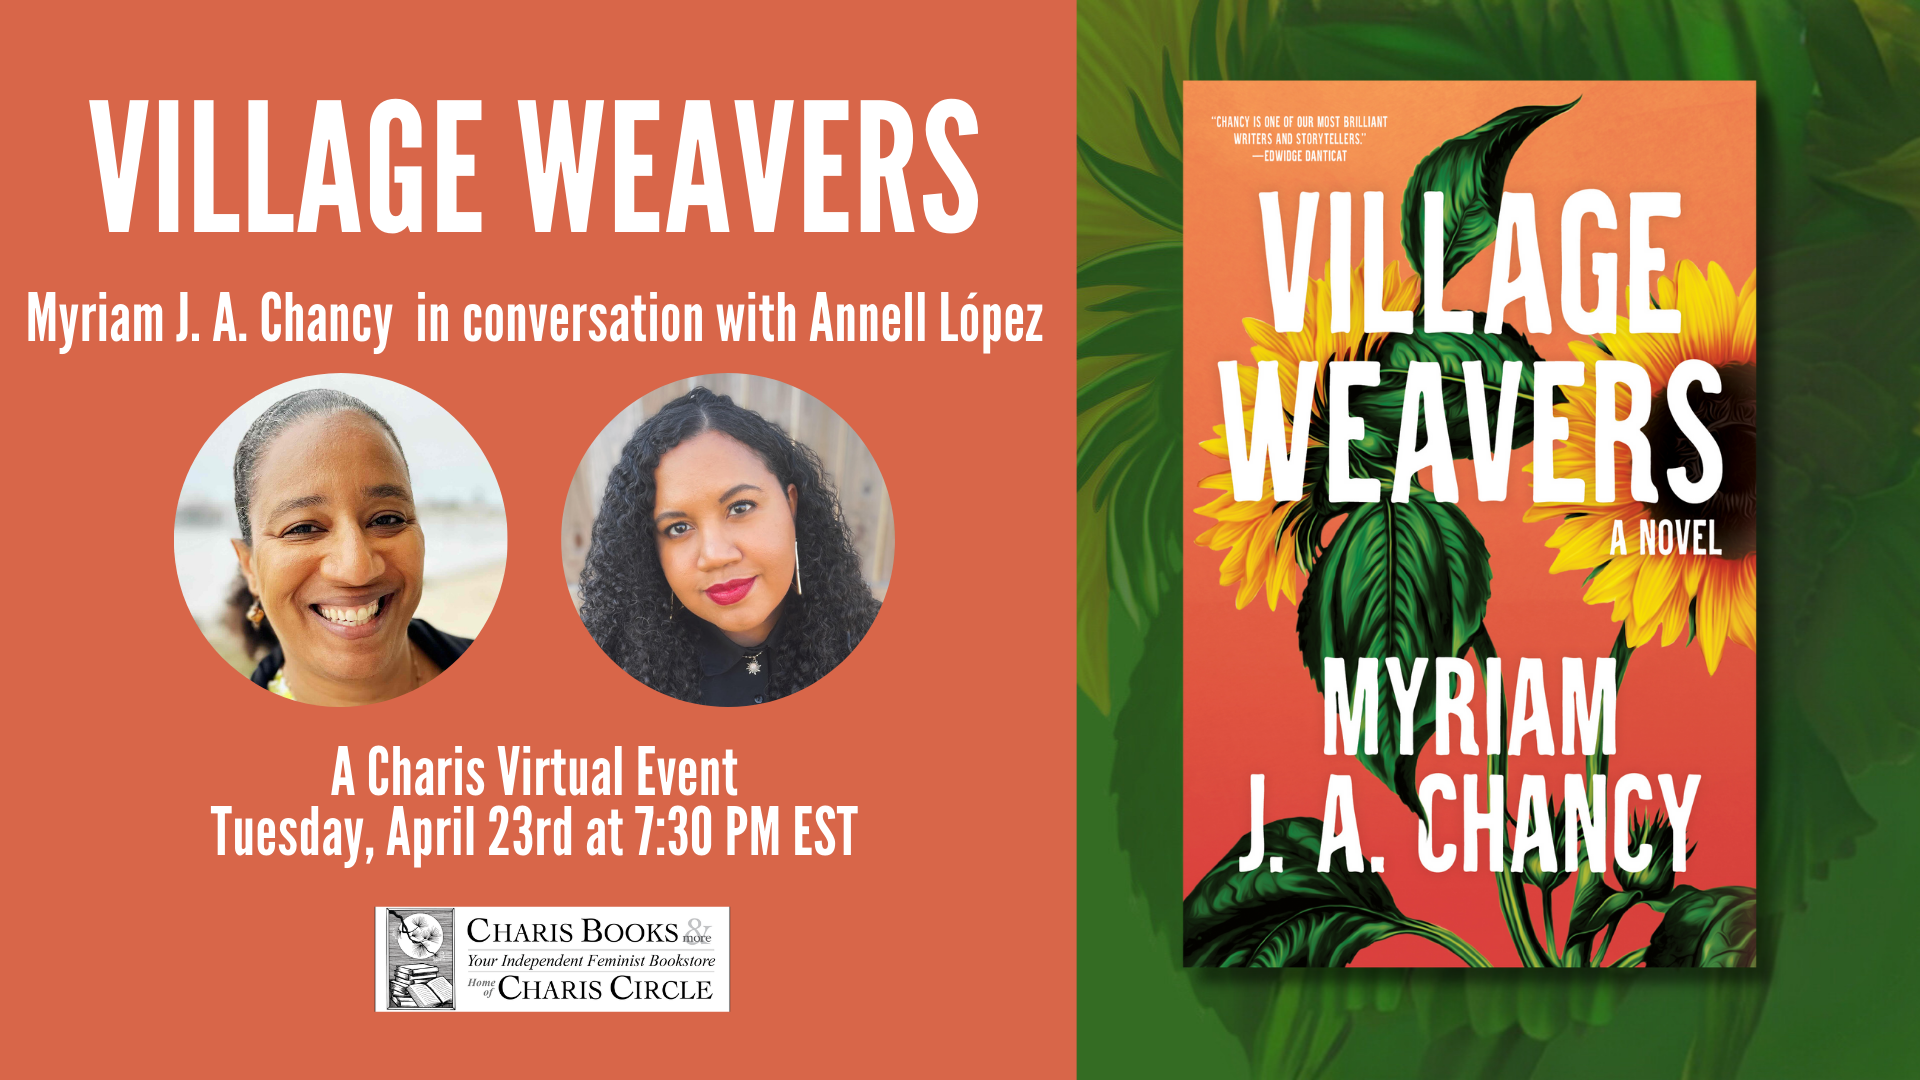 Village Weavers: Myriam J. A. Chancy in conversation with Annell López event cover photo